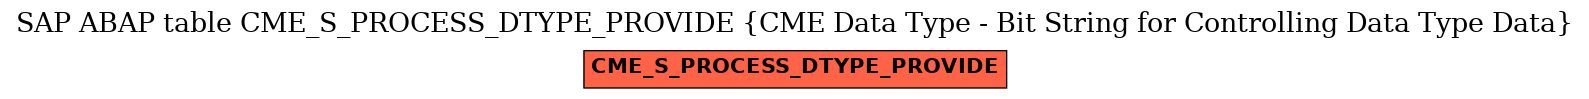 E-R Diagram for table CME_S_PROCESS_DTYPE_PROVIDE (CME Data Type - Bit String for Controlling Data Type Data)